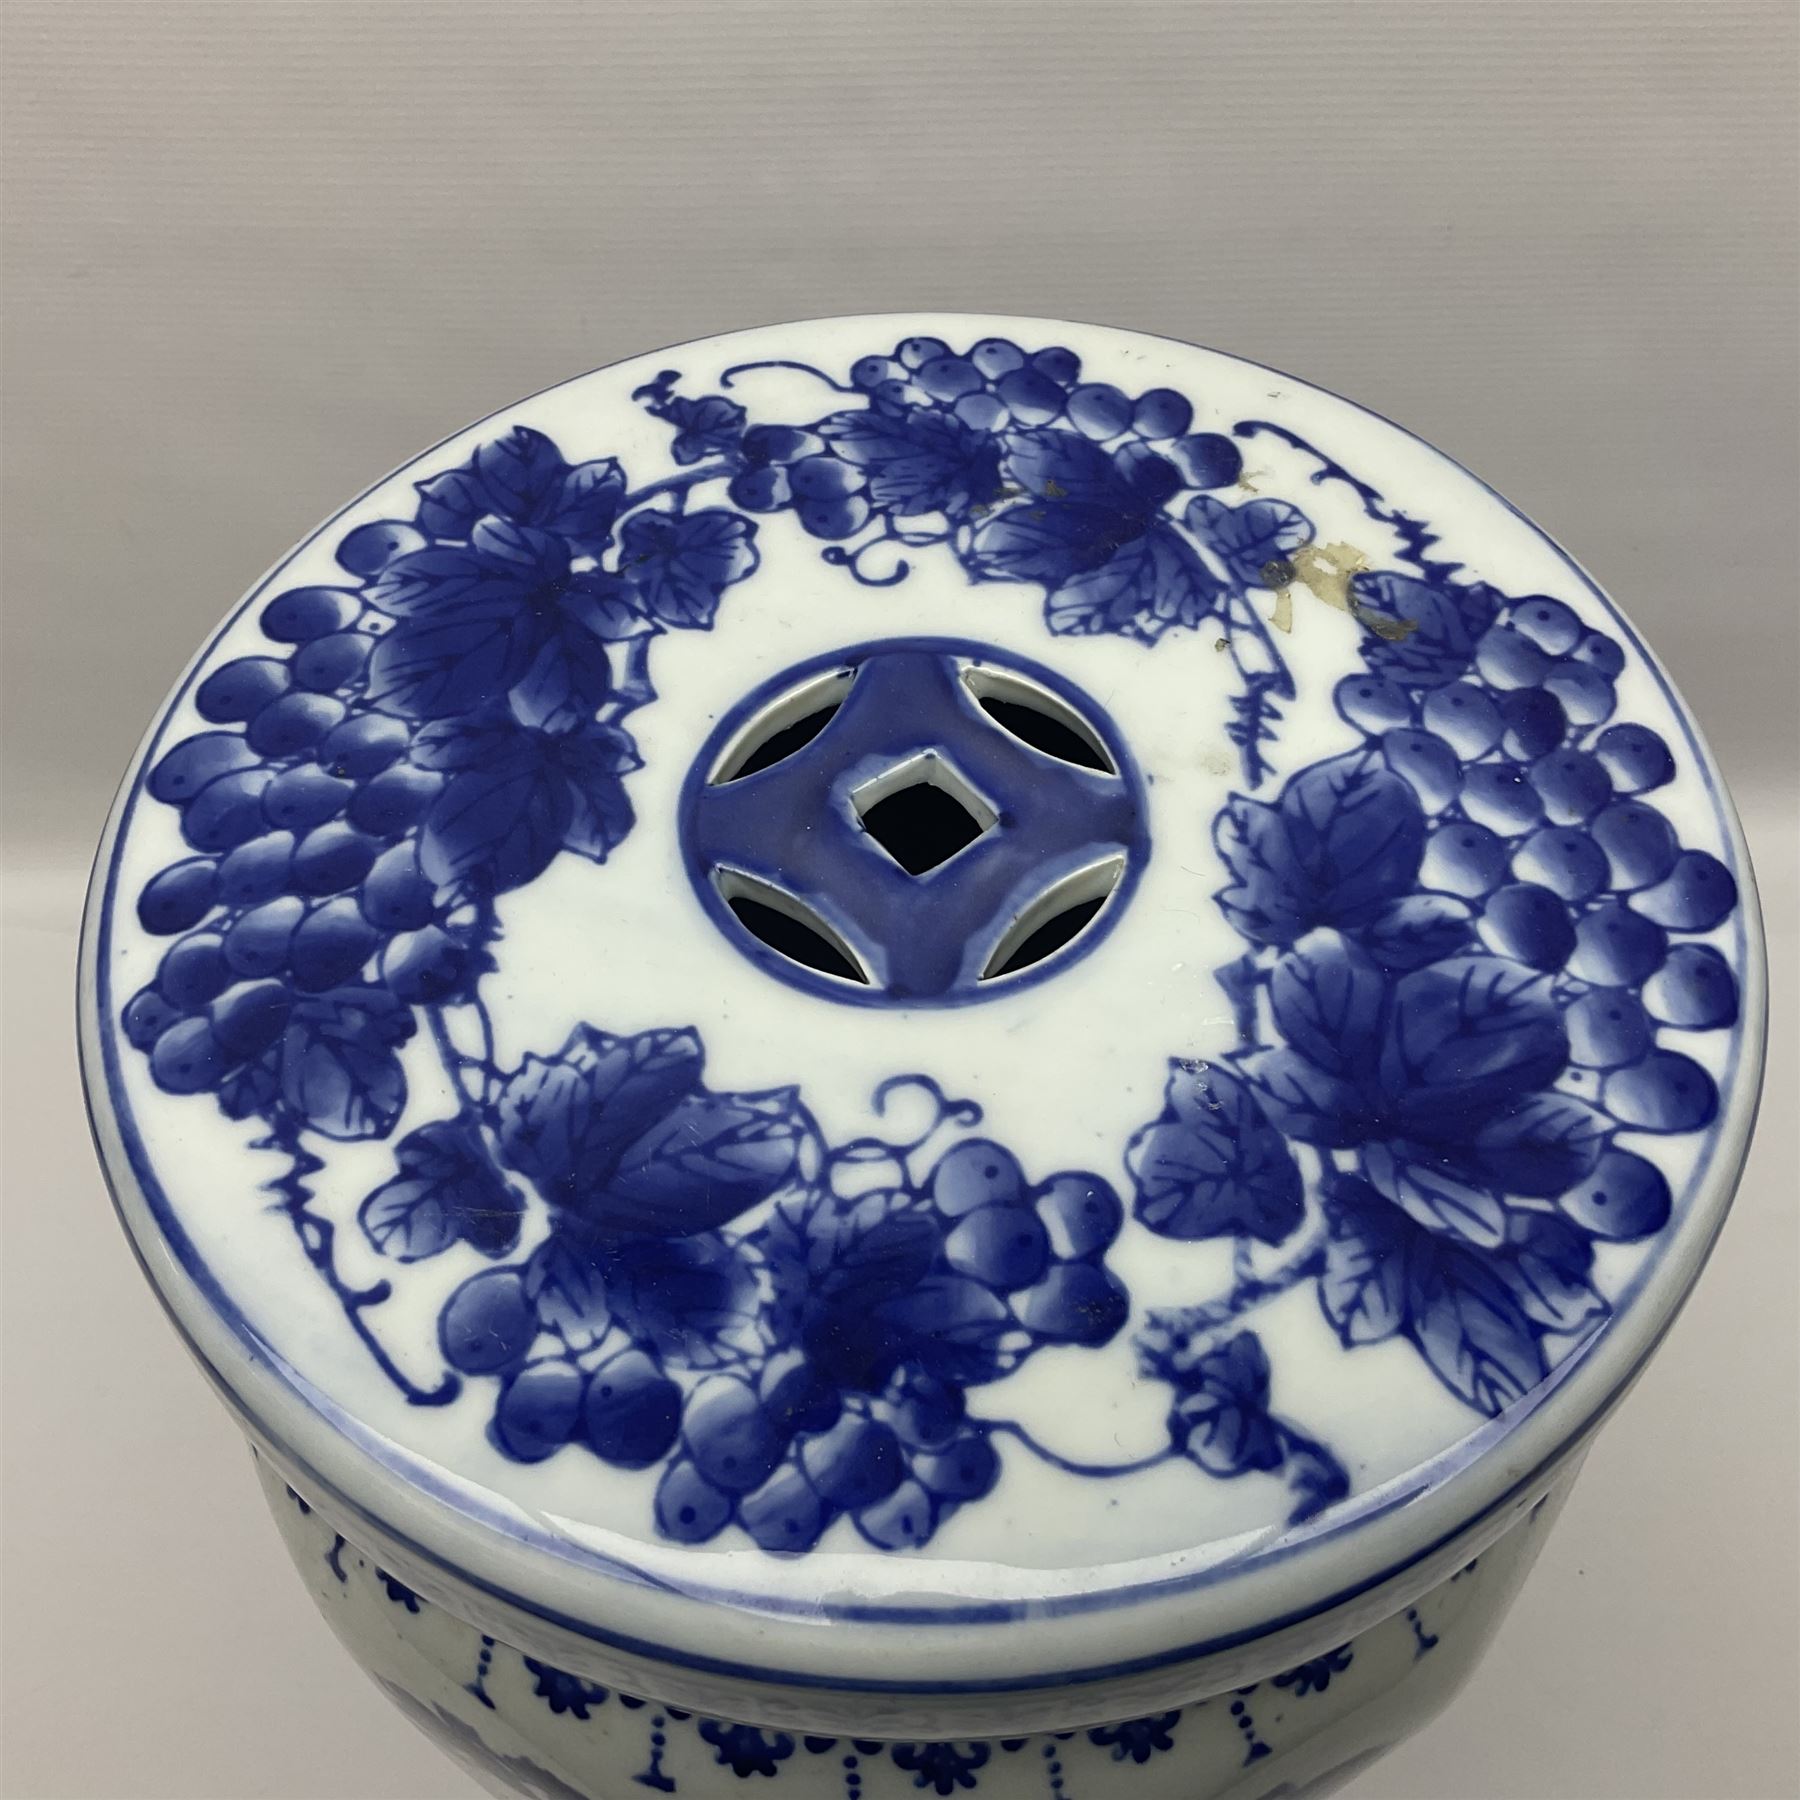 Oriental style blue and white ceramic garden seat - Image 2 of 10